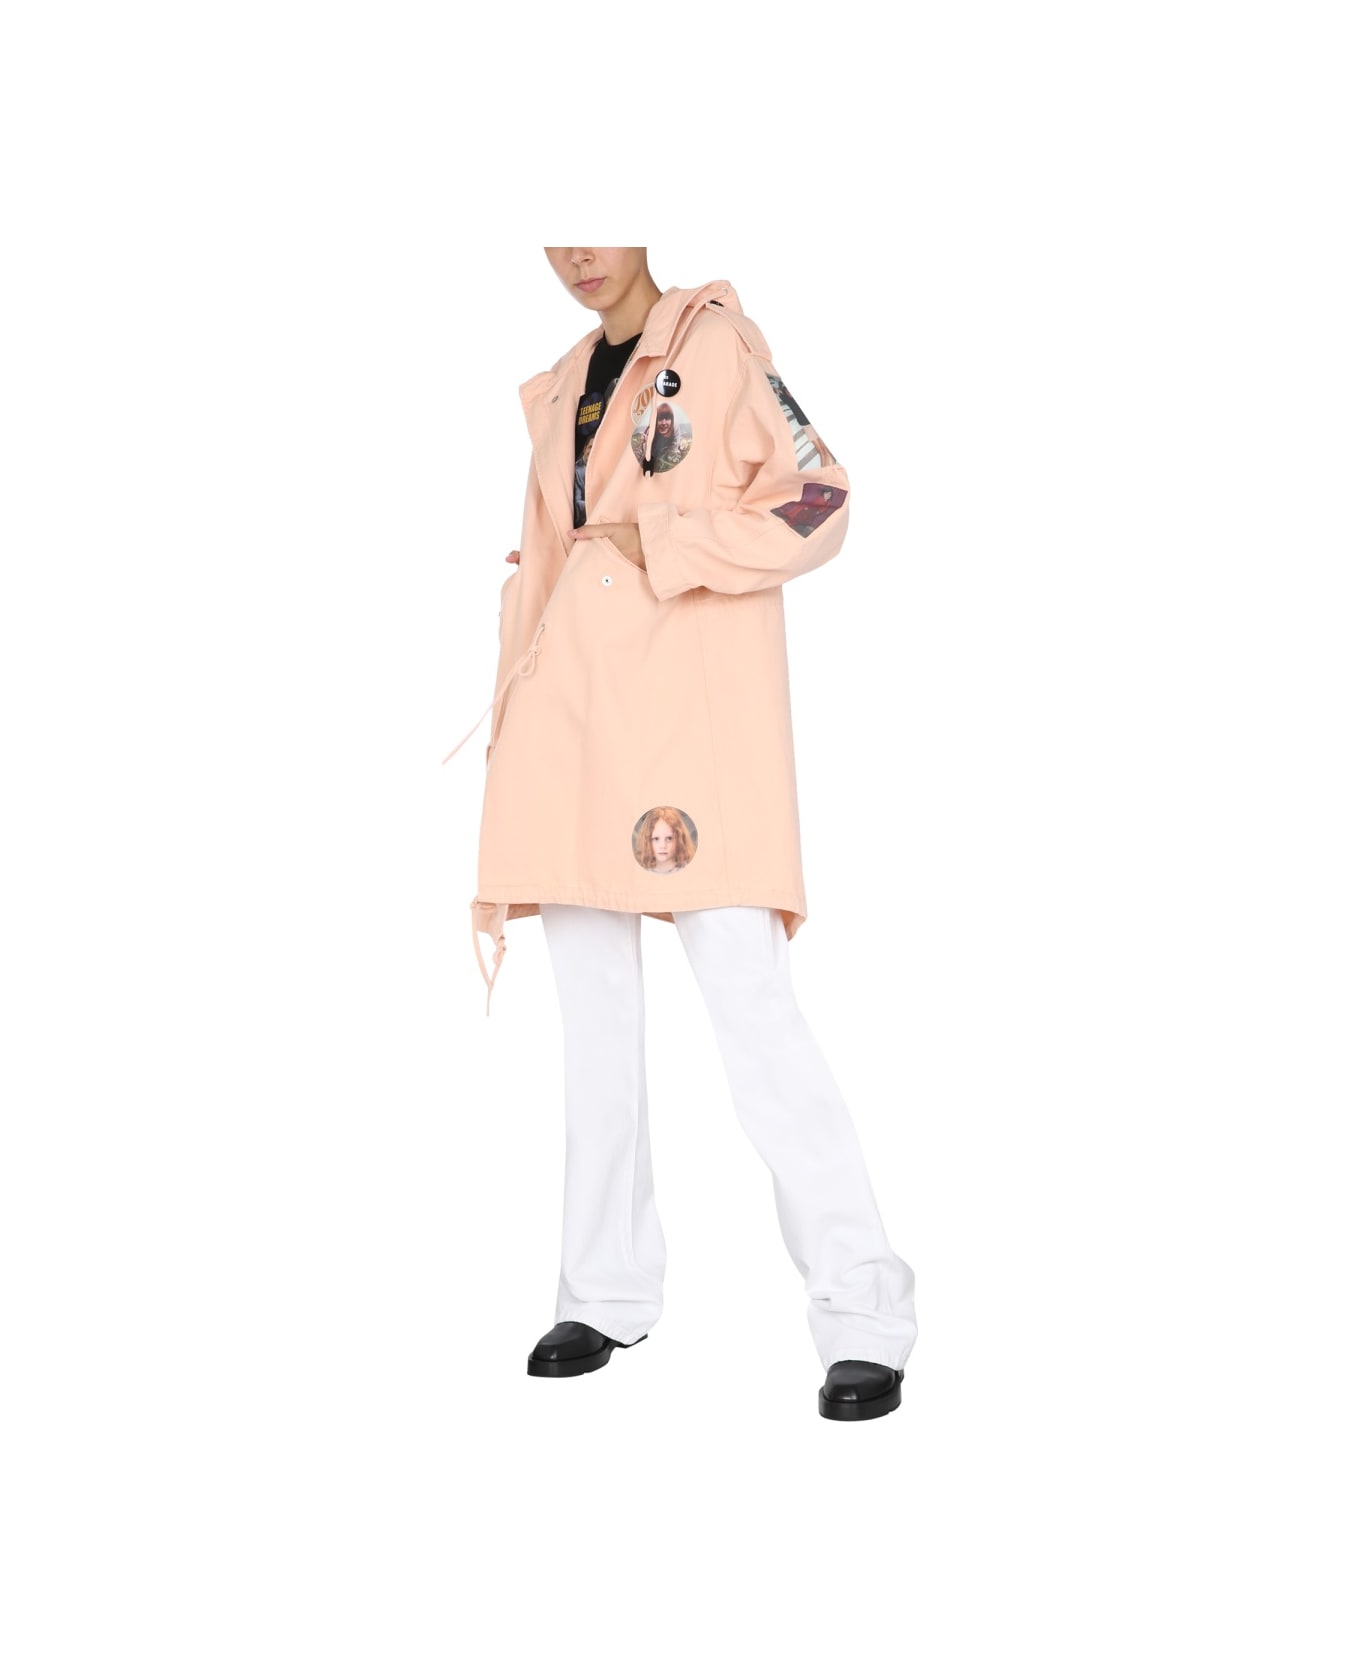 Raf Simons Parka With Logo Patch - PINK